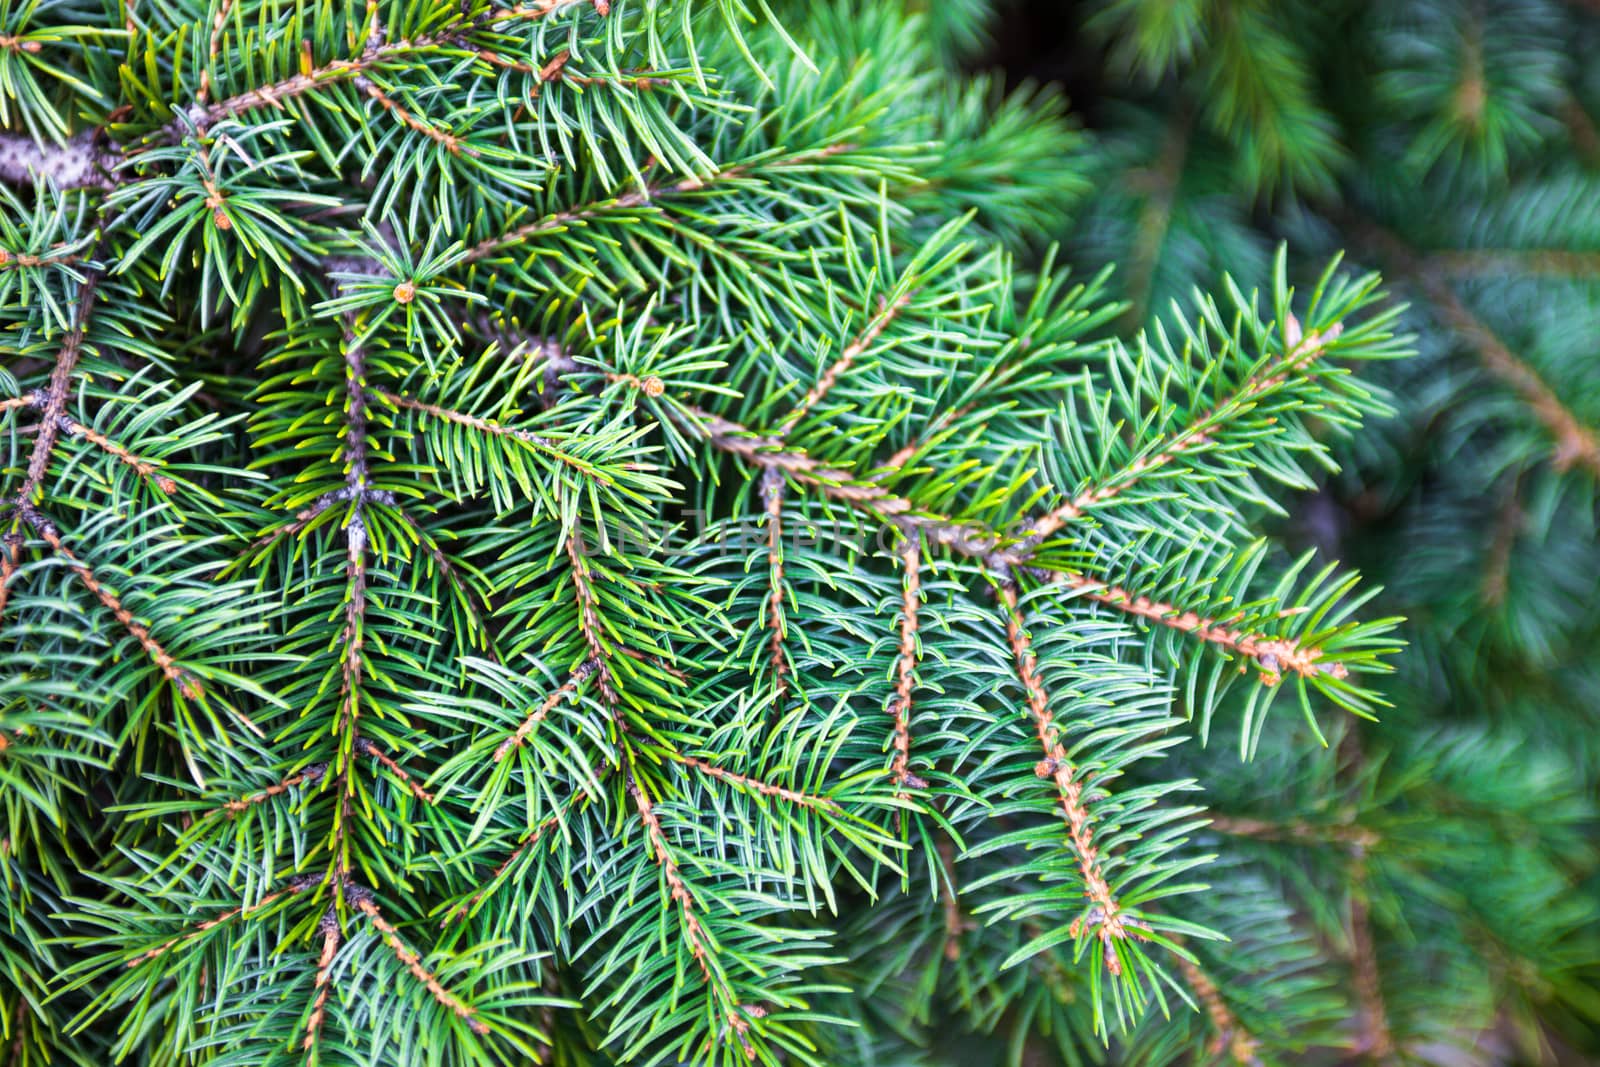 Branches of the evergreen coniferous plant with needle-like leaves.